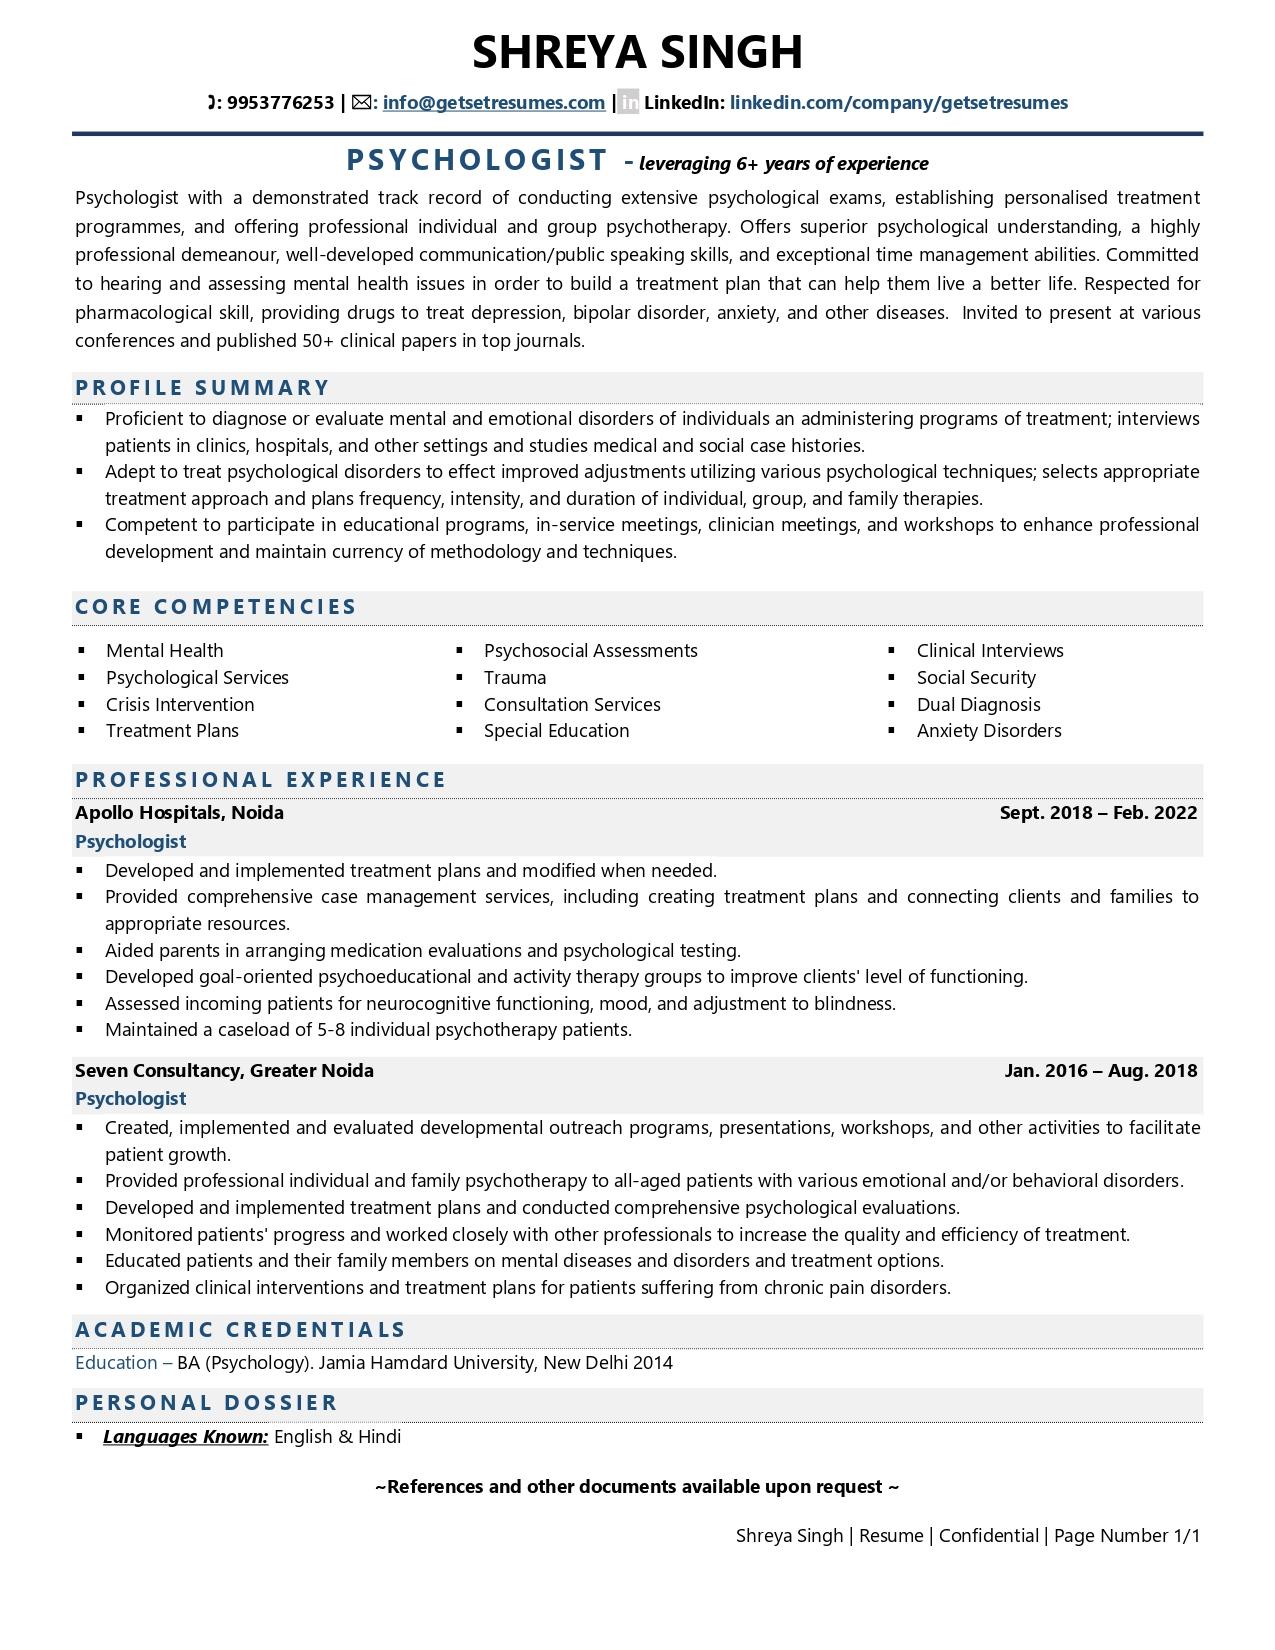 Psychologist - Resume Example & Template